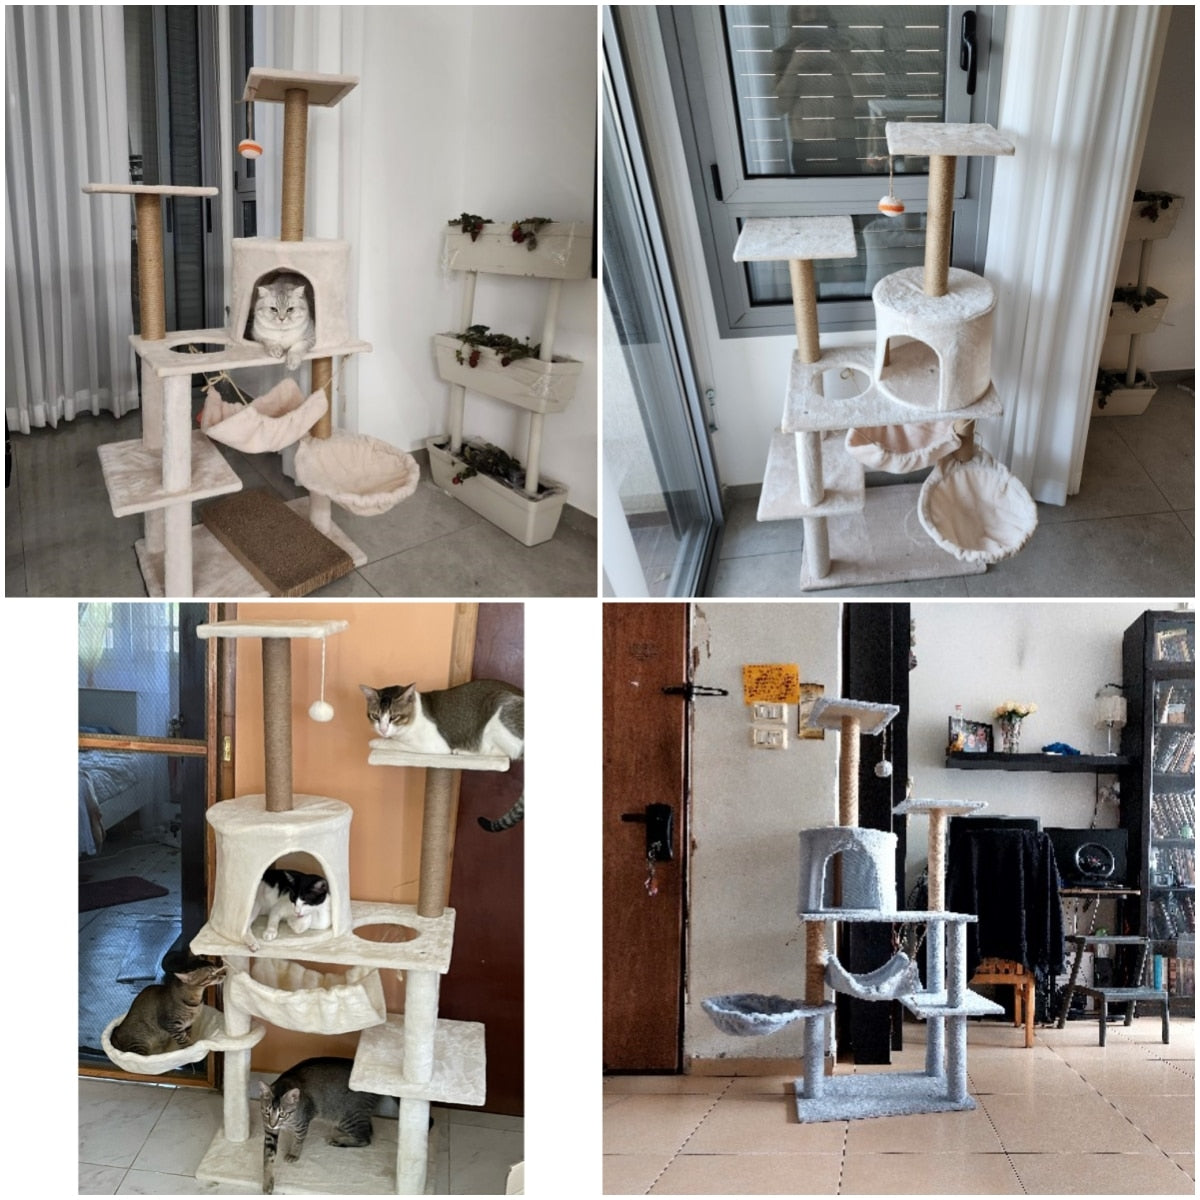 Let Your Cat Have Some Fun With One Of These Amazing Multi-layer Cat Tree Towers With Cozy Perches, Stable Cat Climbing Frame, Cat Scratch Posts, Fully Cover Plush Cloth Cat House